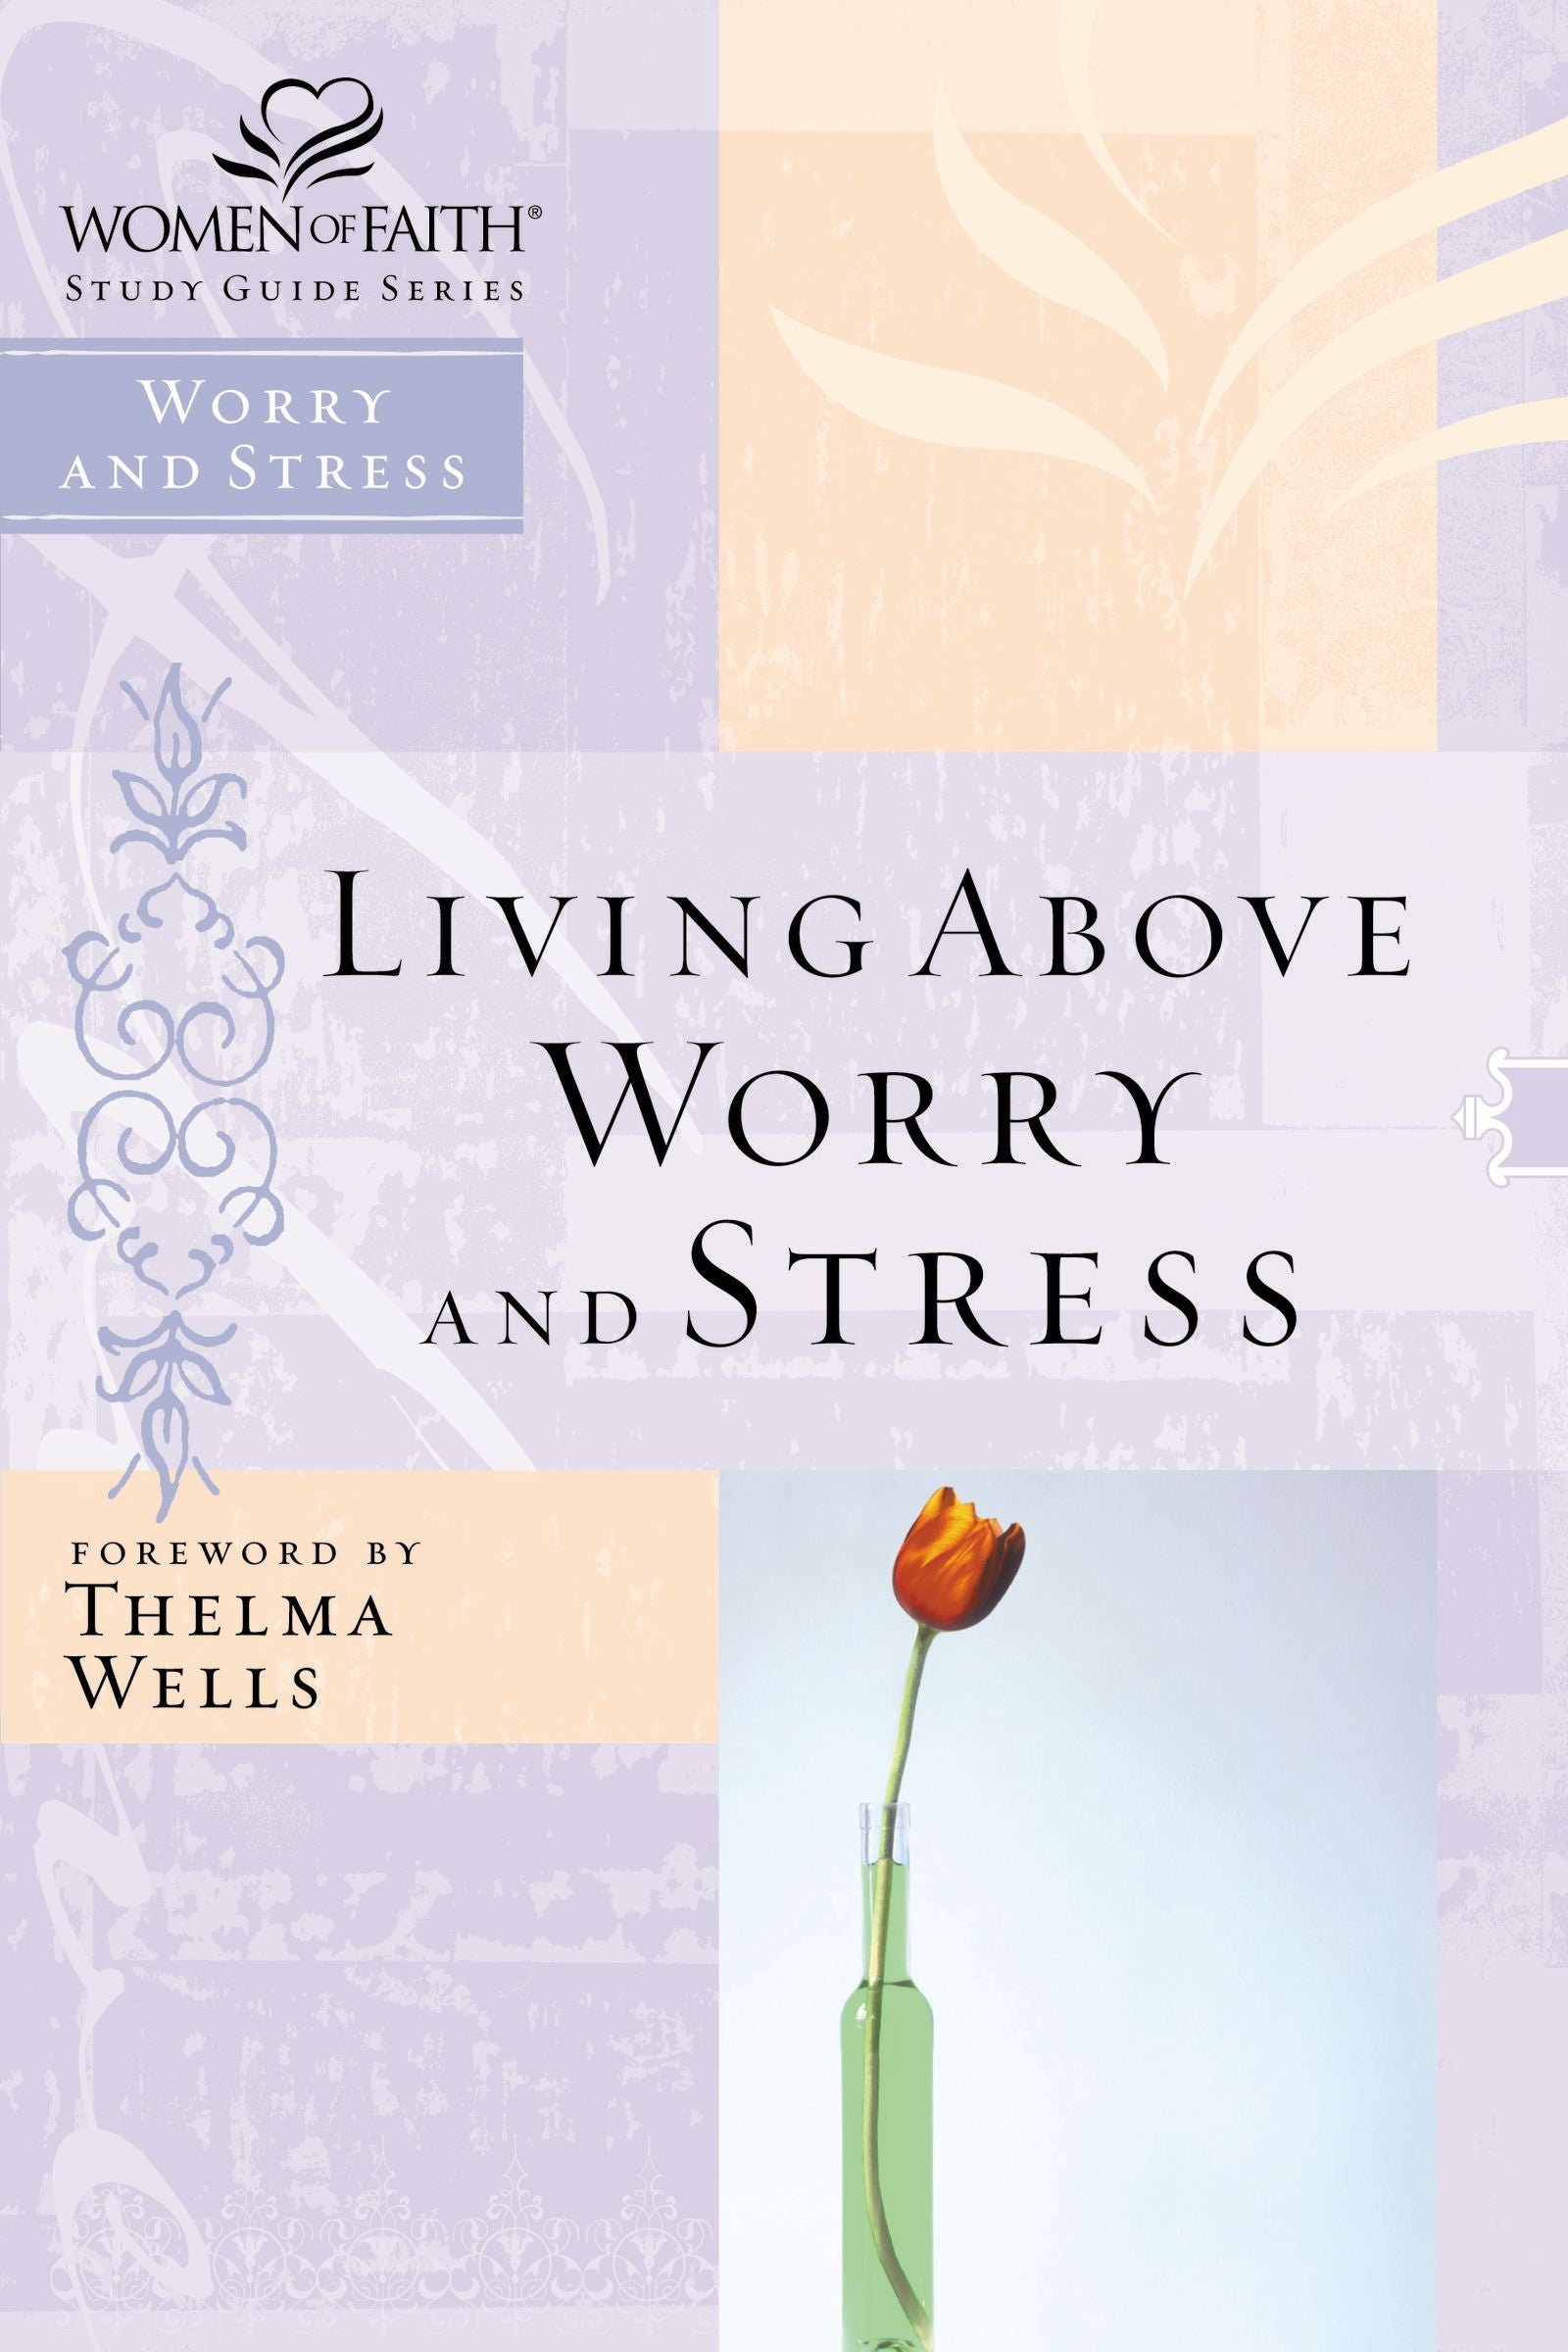 Image of Living Above Worry and Stress other